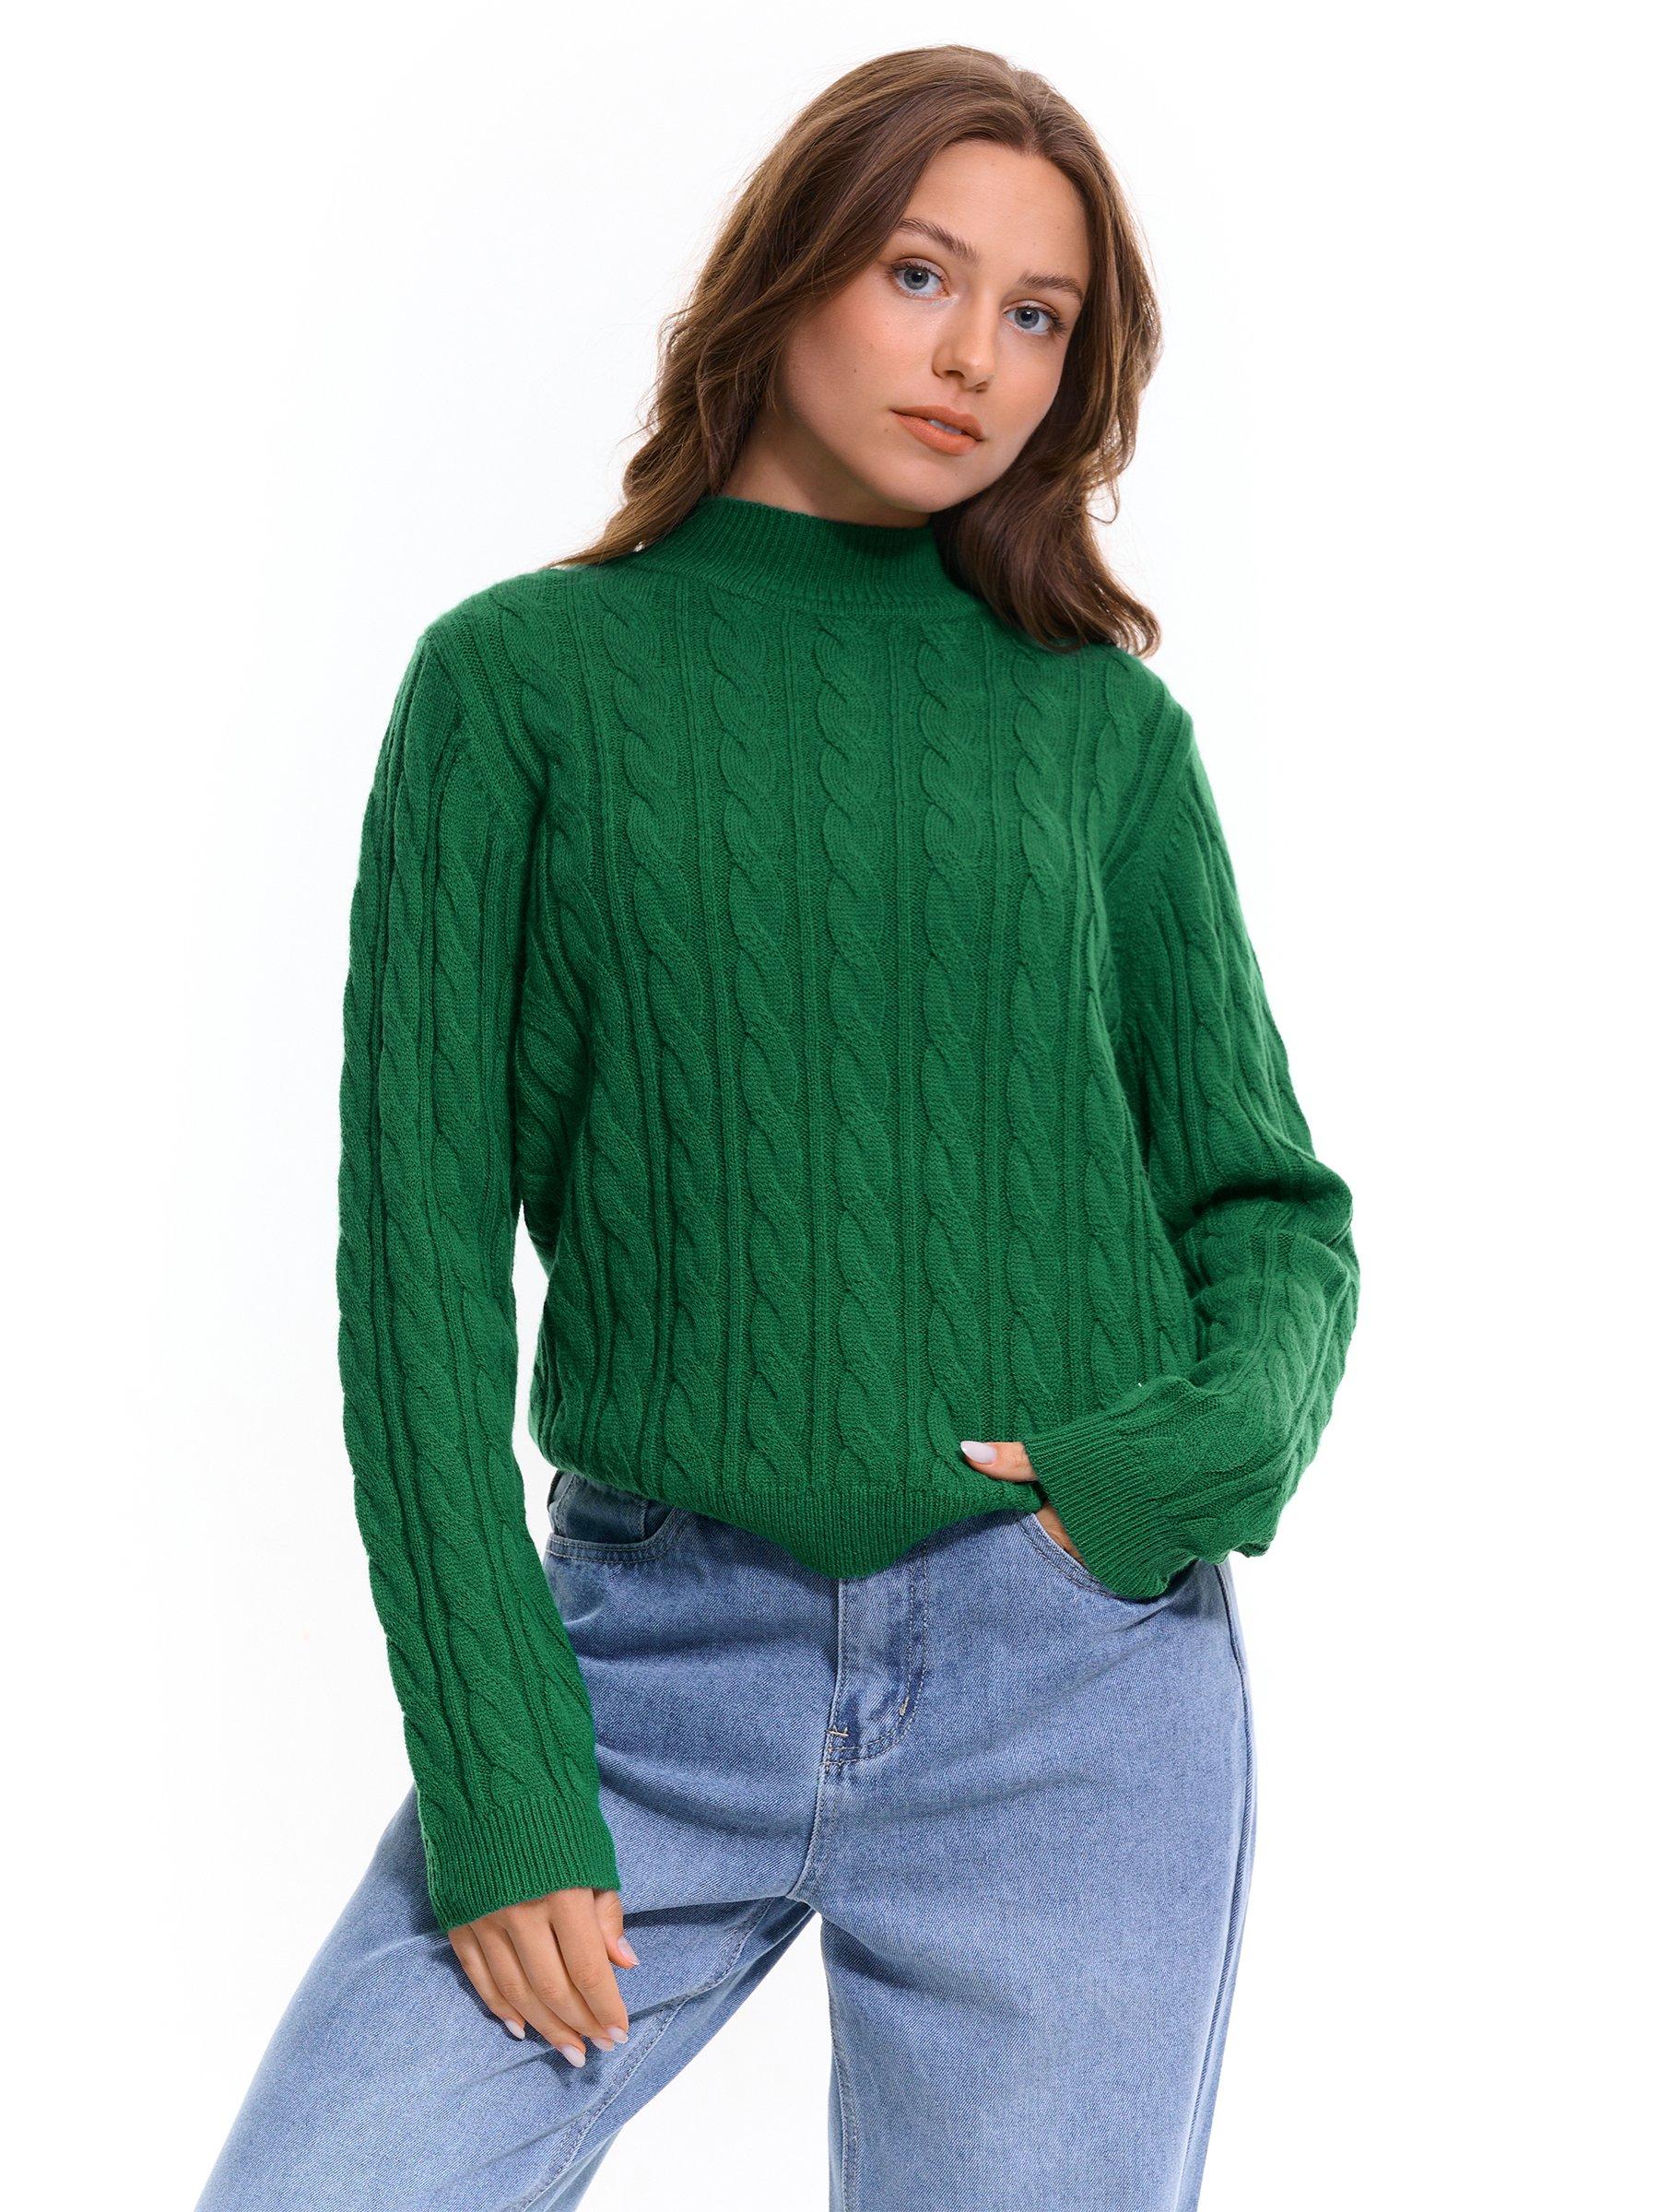 Women's Knitwear | Womens GATE Cable knit high neck  pullover Green